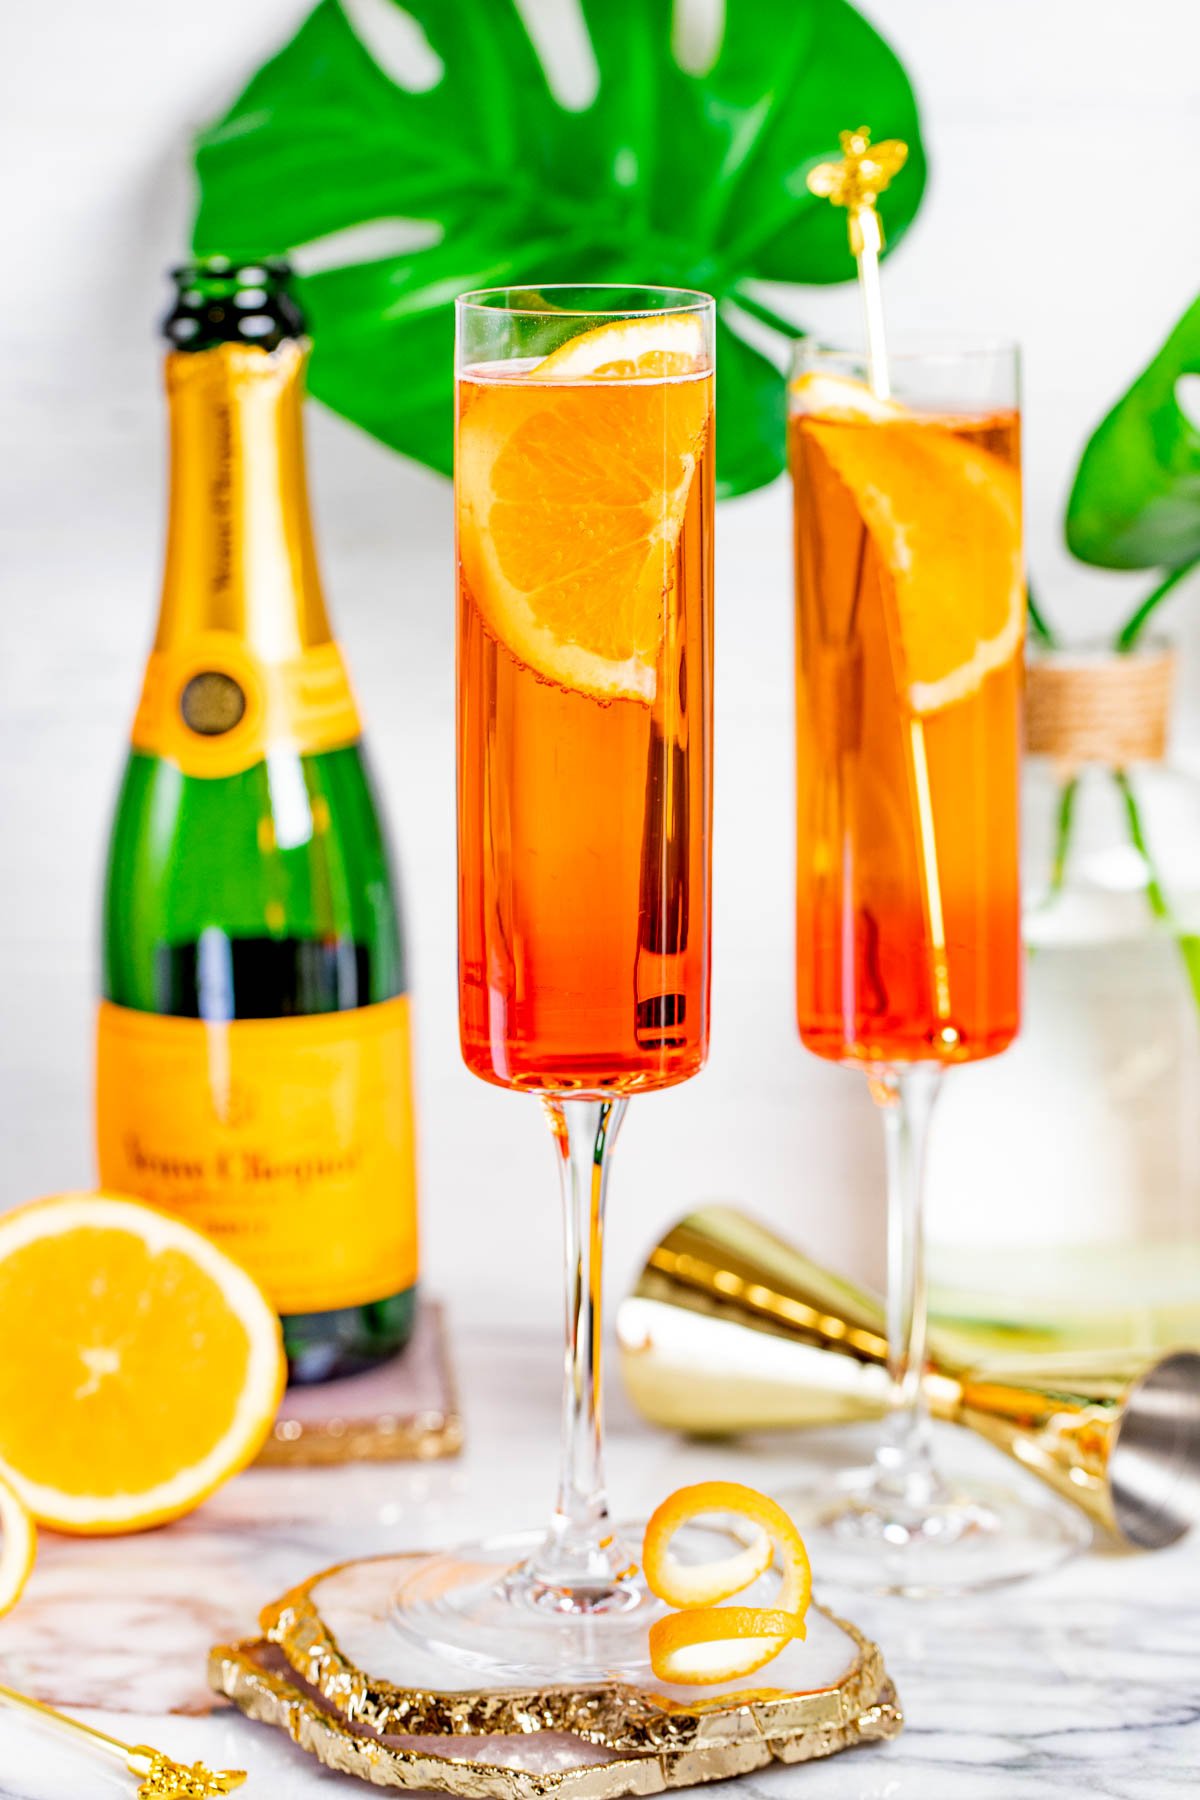 Aperol Spritz - Basil And Bubbly